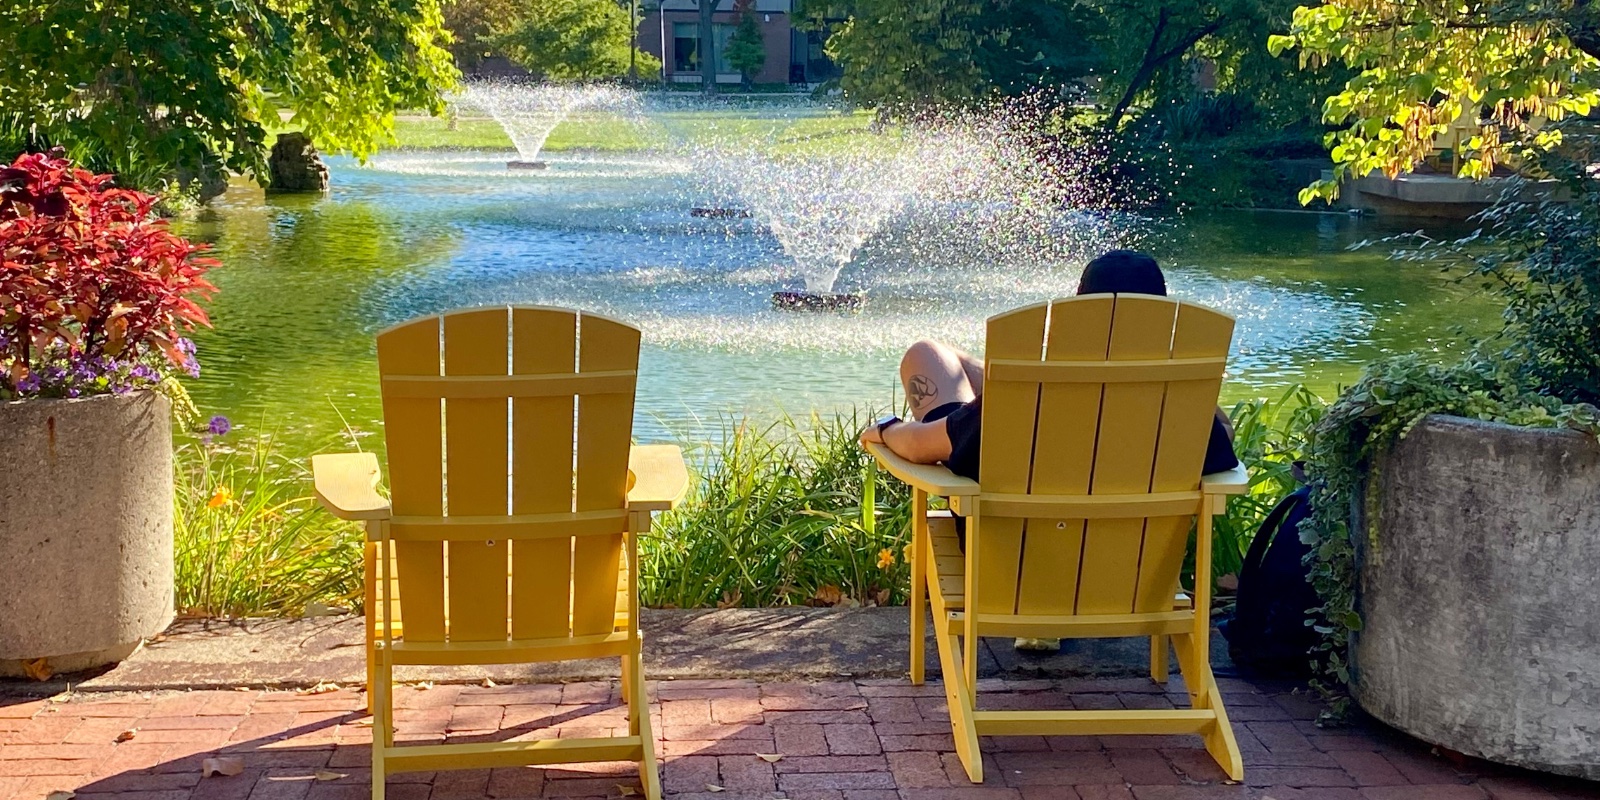 Male sitting in chair over looking the Chancellor's Pond on a beautiful summer day